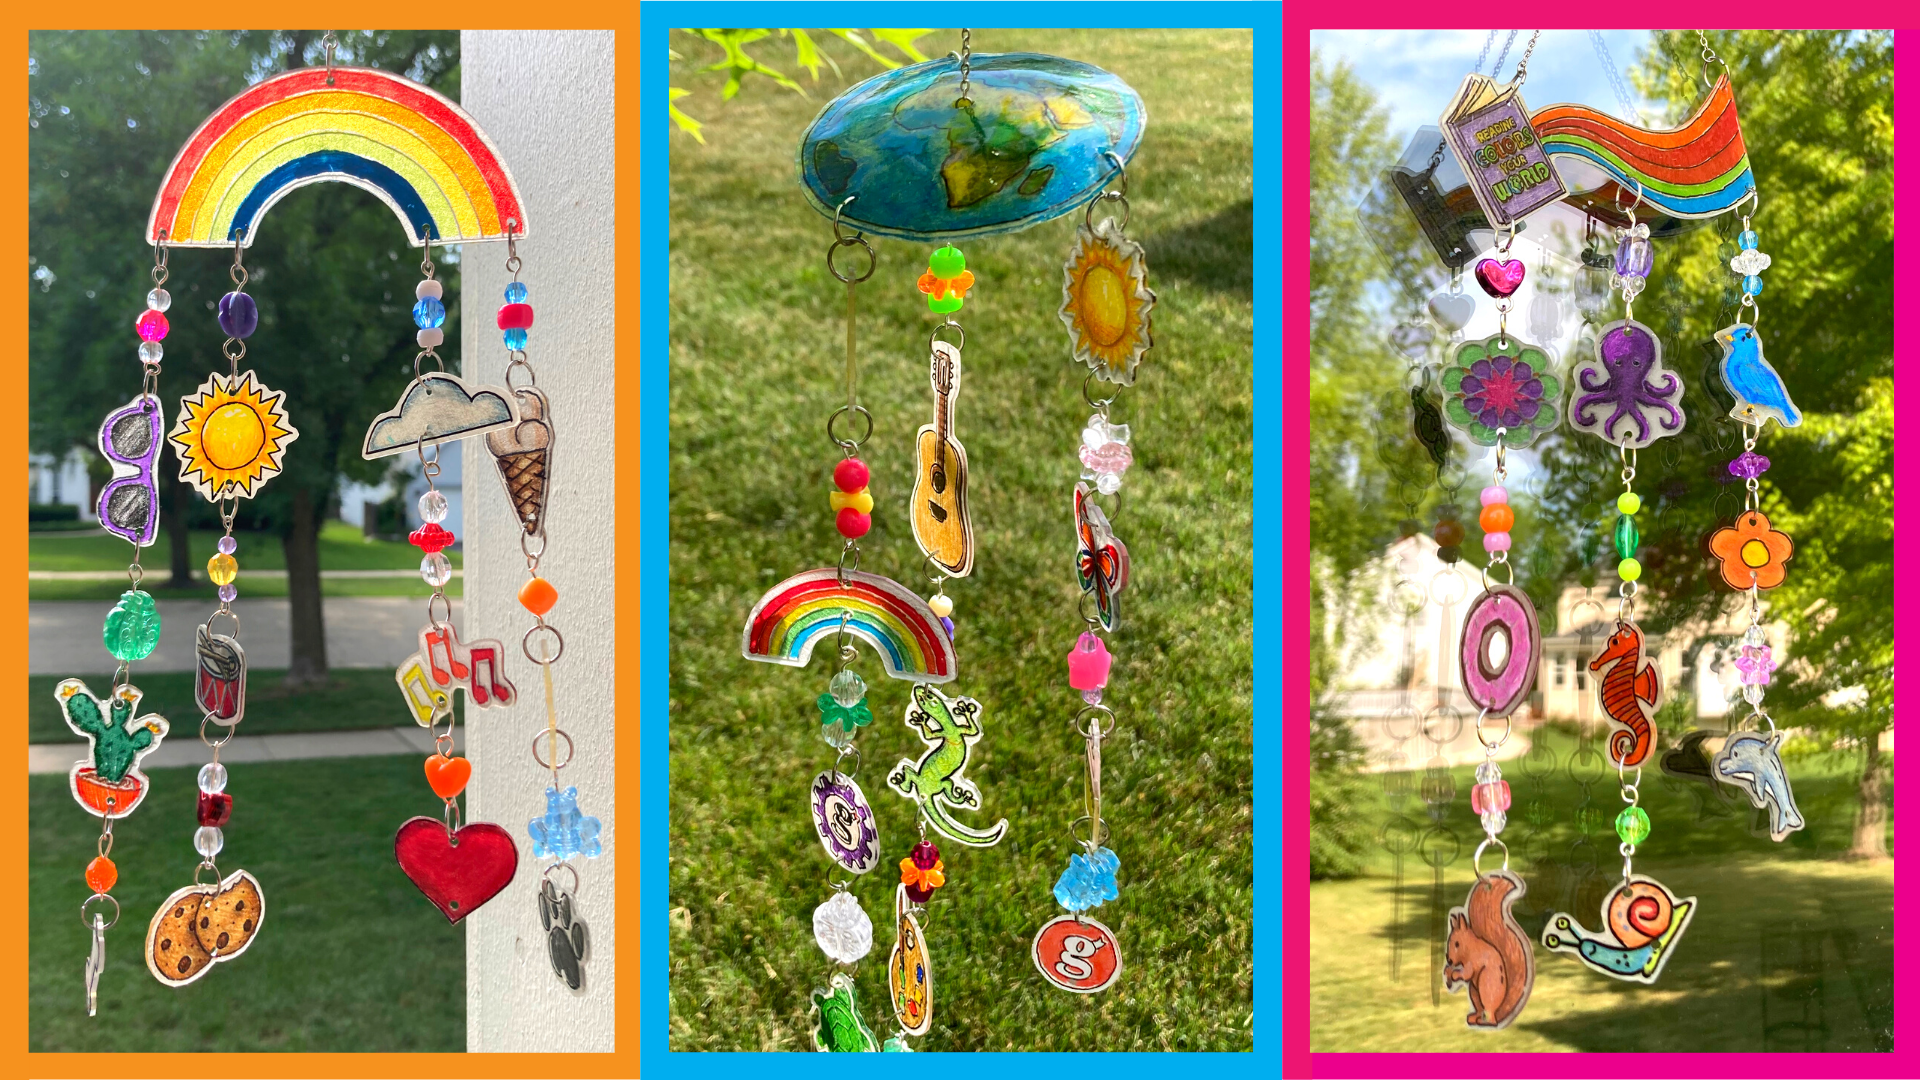 3 Samples of Reading Colors Your World: Shrinky Dinks Wind Chimes